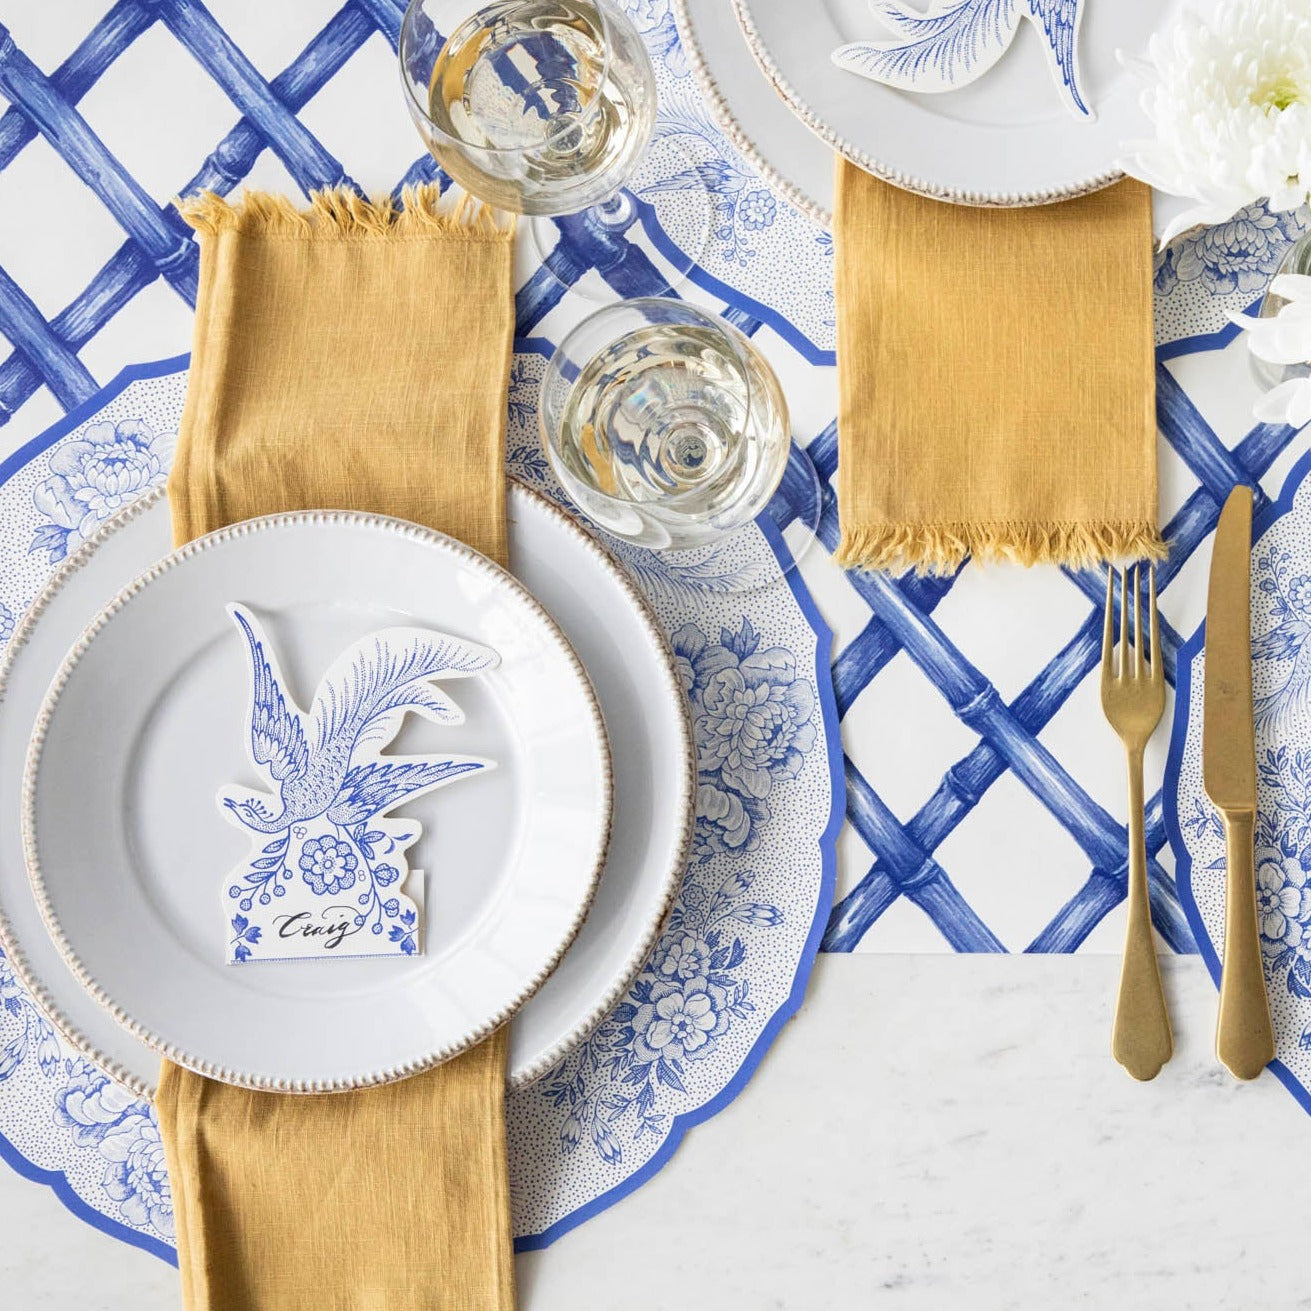 The Die-cut Blue Asiatic Pheasants Placemat in an elegant table setting, from above.